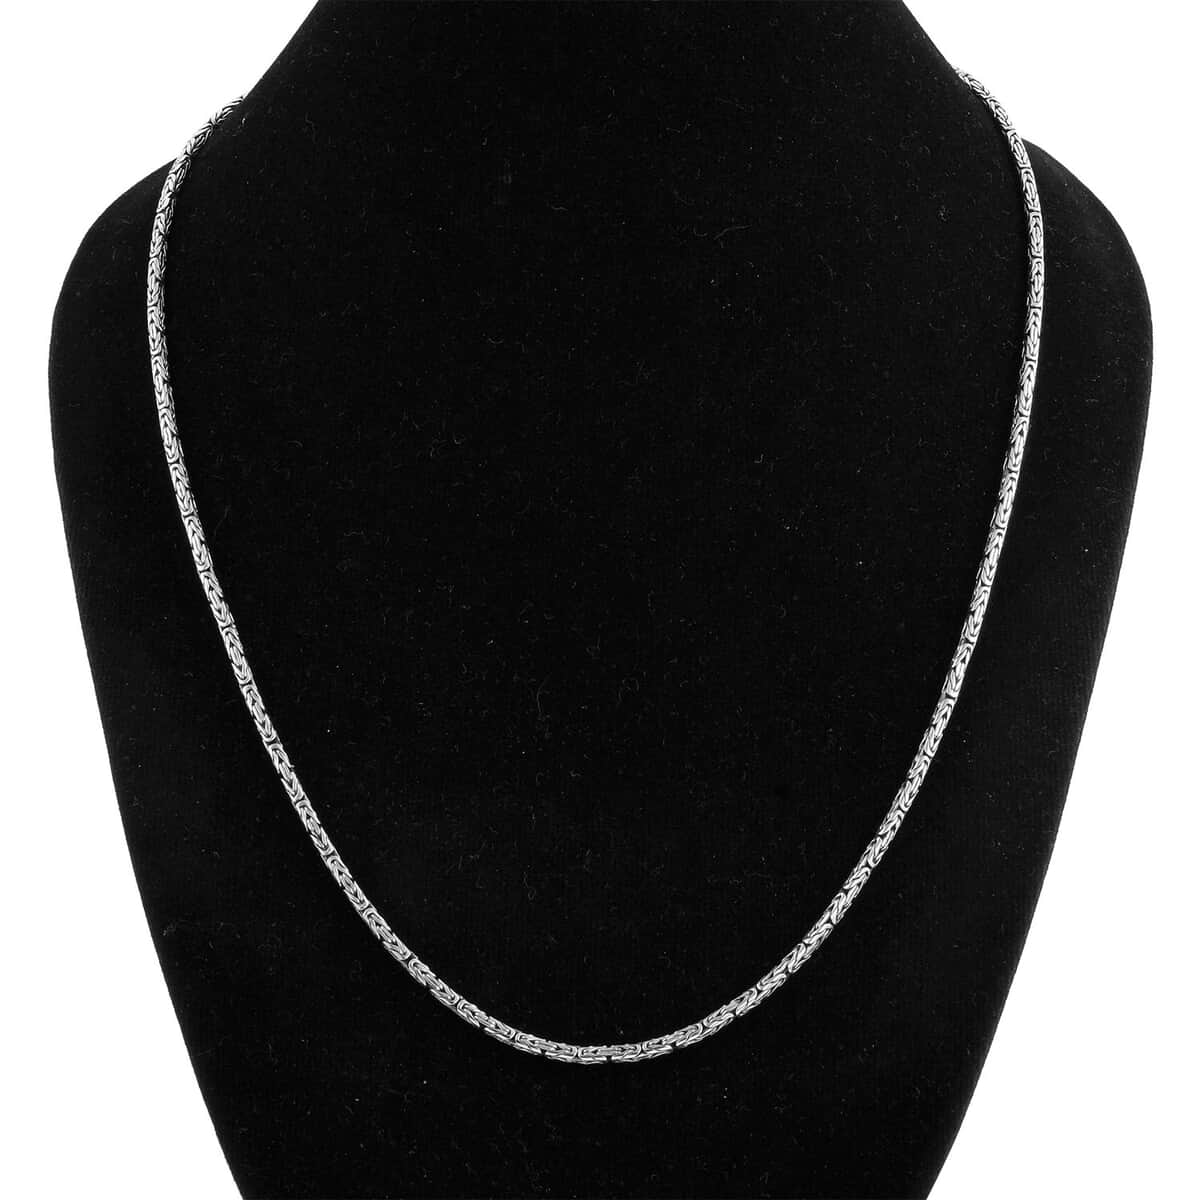 Buy BALI LEGACY Sterling Silver Borobudur Chain Necklace 20 Inches 21. ...